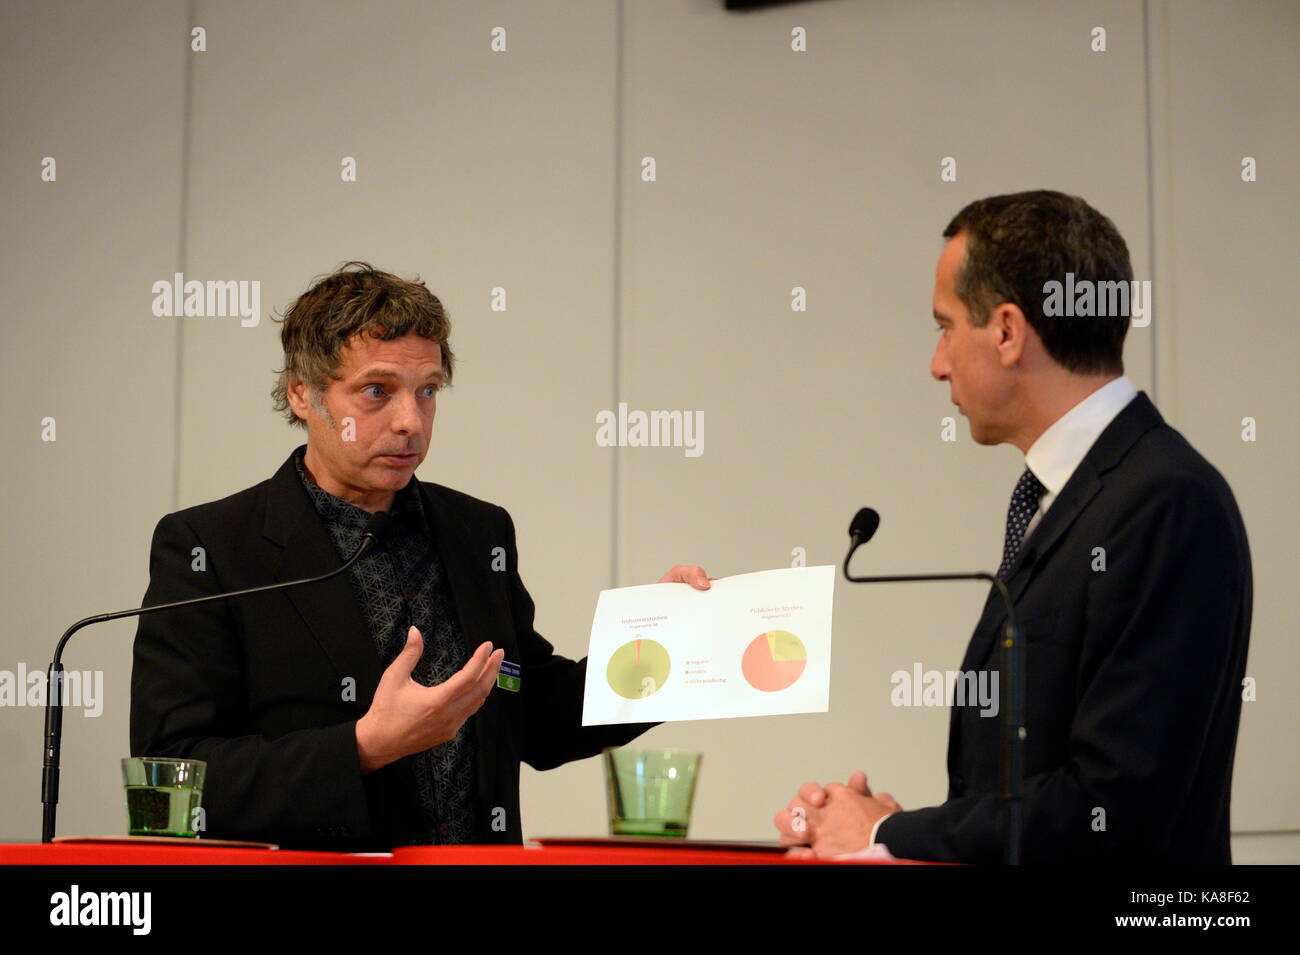 Vienna, Austria. 26th Sep, 2017. Press conference with Federal Chancellor Christian Kern and environmental chemist Helmut Burtscher-Schaden  from Global 2000 on current environmental policy issues. Image shows environmental chemist Helmut Burtscher-Schaden (L) and Federal Chancellor Christian Kern (R). Credit: Franz Perc/Alamy Live News Stock Photo